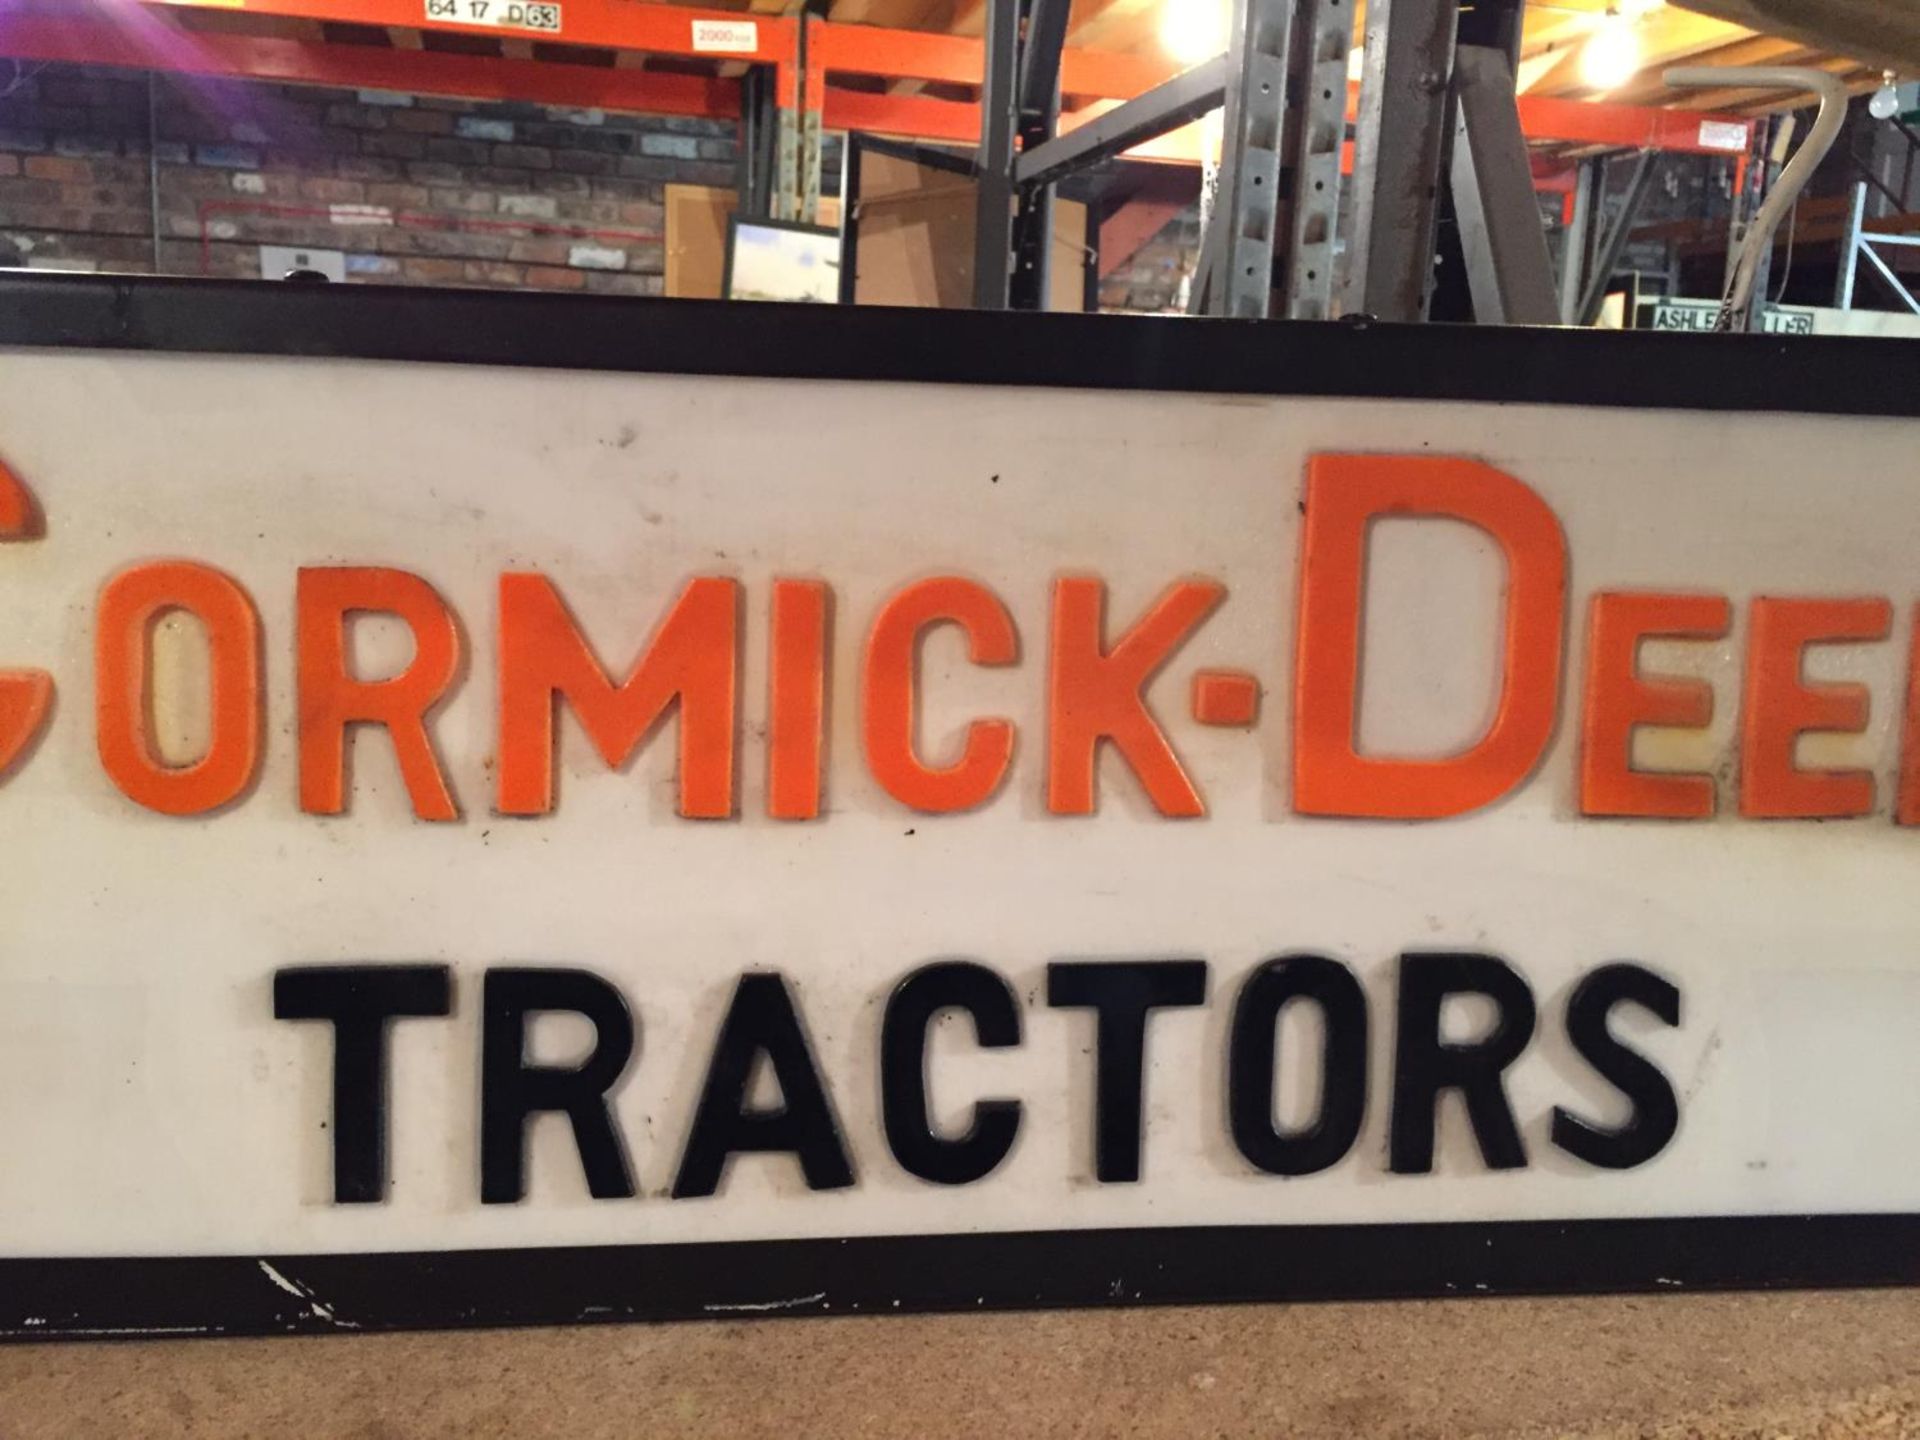 A McCORMICK-DEERING TRACTORS ILLUMINATED SIGN - Image 3 of 6